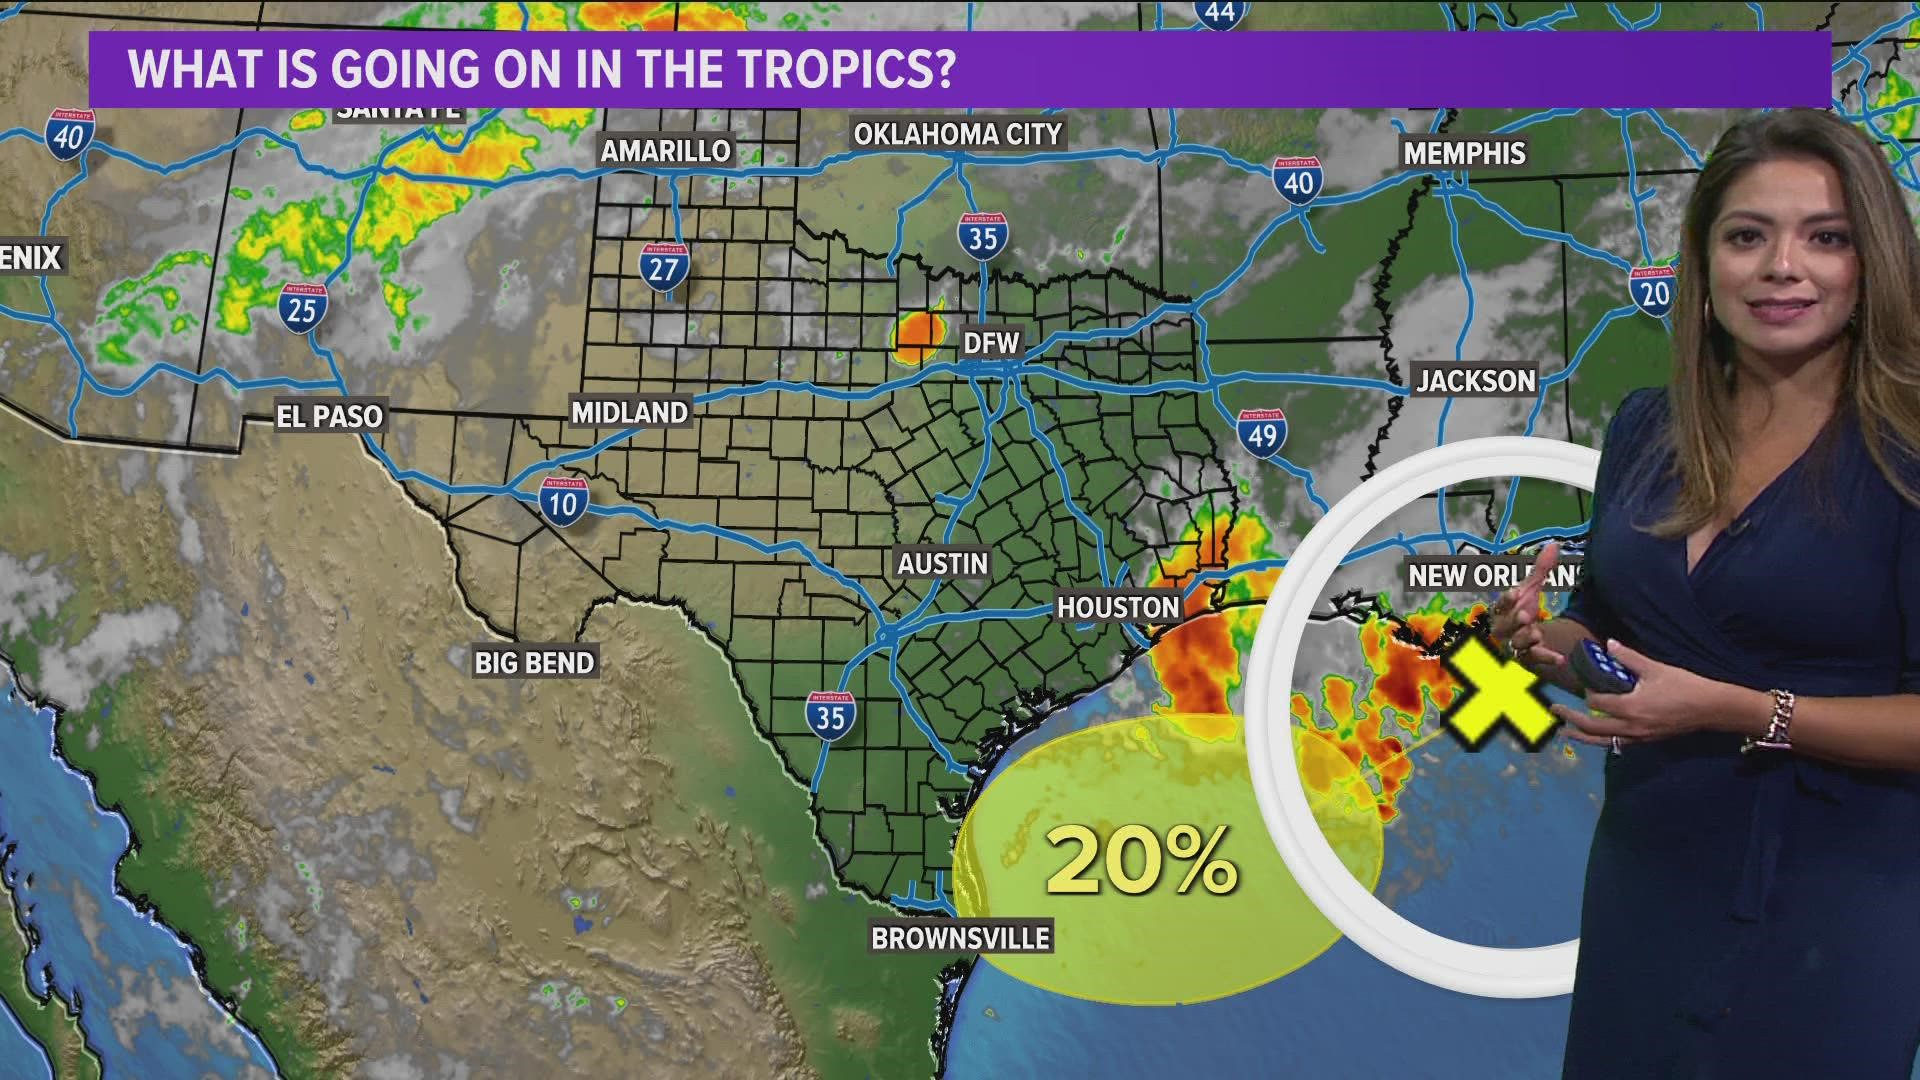 Here's a look at some potential development in the Gulf of Mexico.